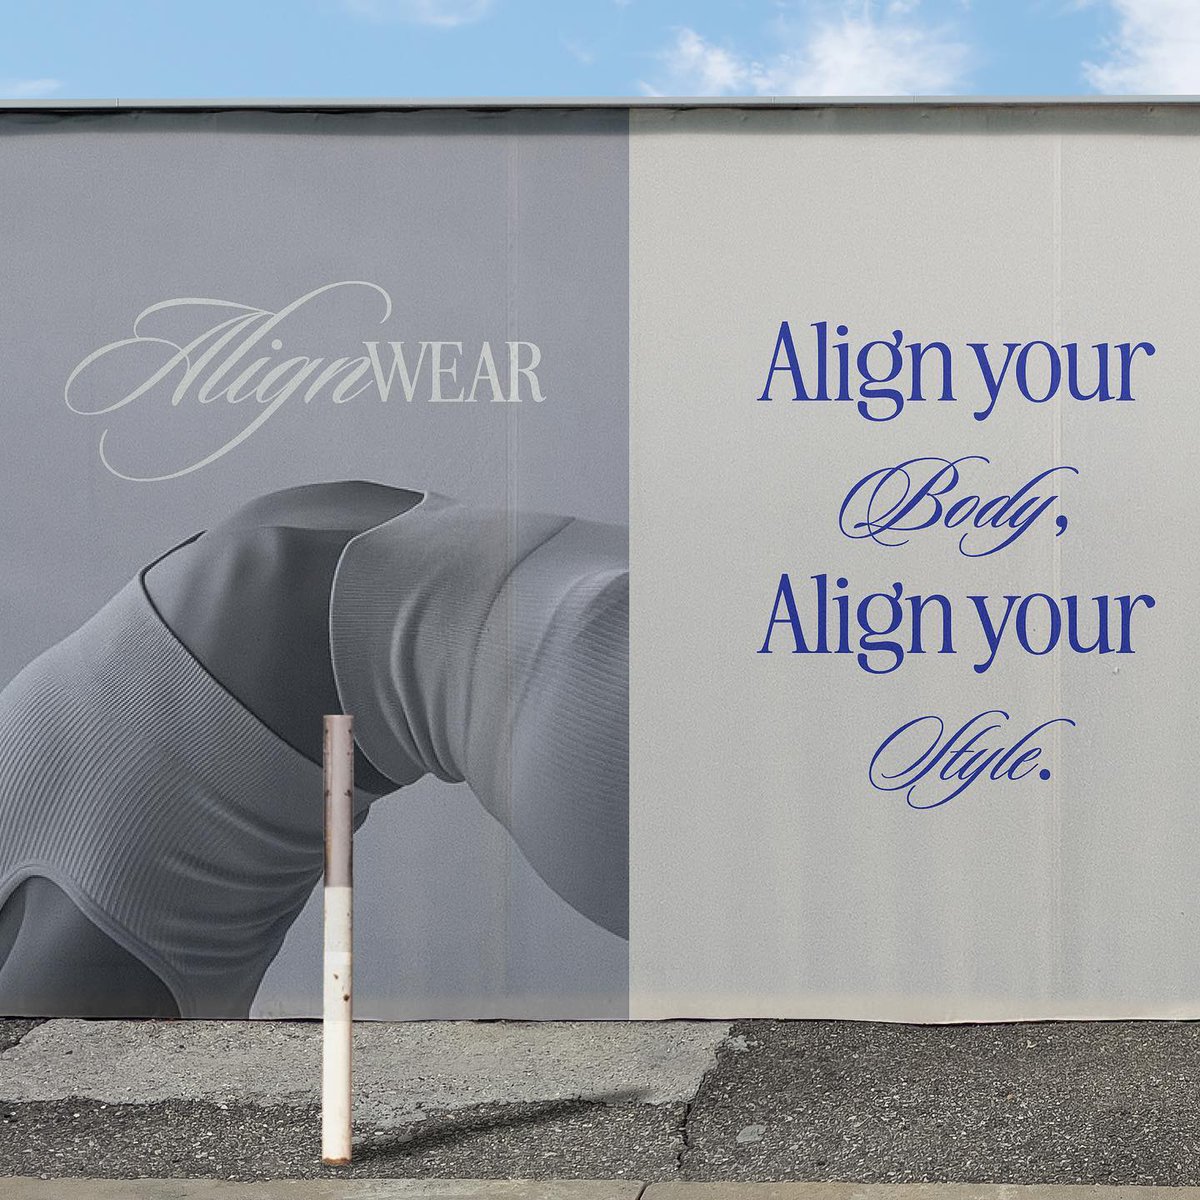 Introducing Align Wear, a Pilates brand meticulously crafted by Nadia, from Nala Designs. Nadia used Envato Elements Mockup Templates to bring this beautiful branding work to life. #MadeWithEnvato